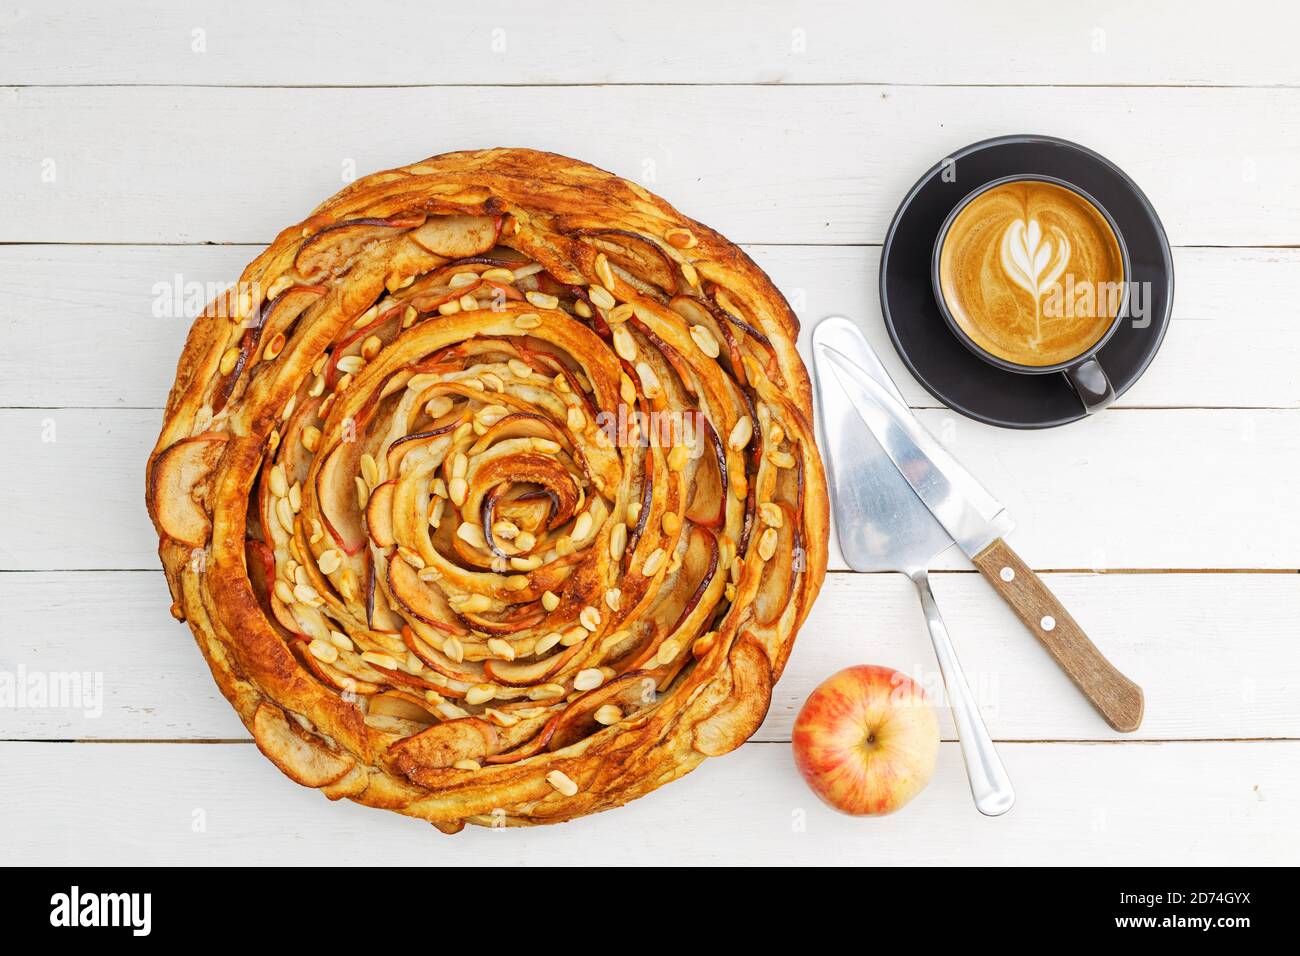 Fresh baked homemade apple and cinnamon puff pastry swirl pie and cup of coffee on white wooden table. Top view. Stock Photo